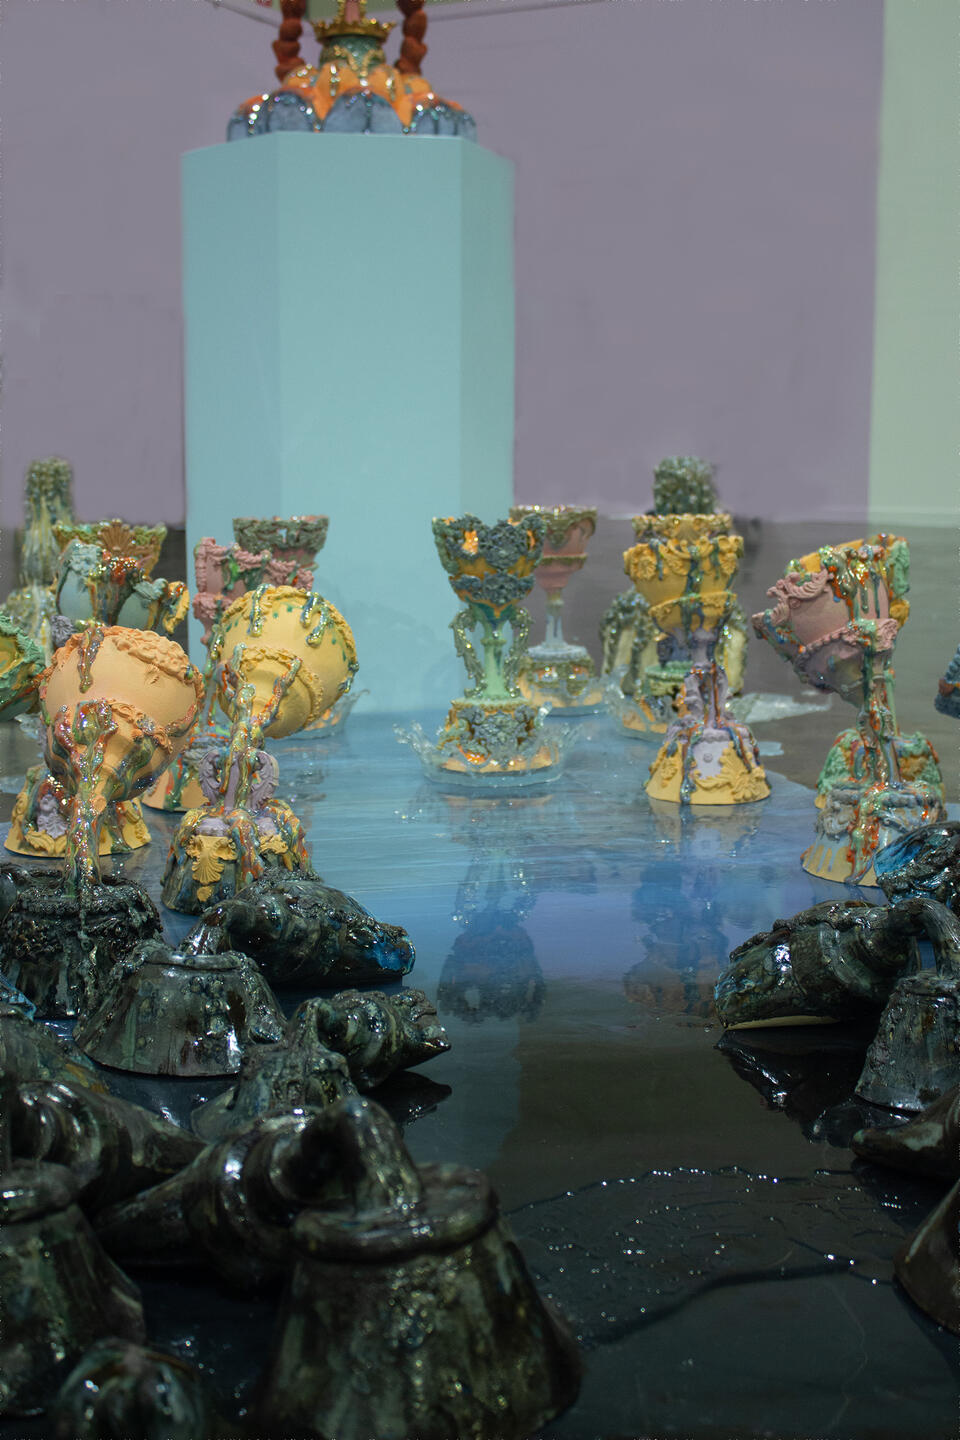 Colorful ceramic vessels arranged in clusters on a reflective surface, with a central pedestal holding an elaborate piece. The holy grails are gradually changing colors.   